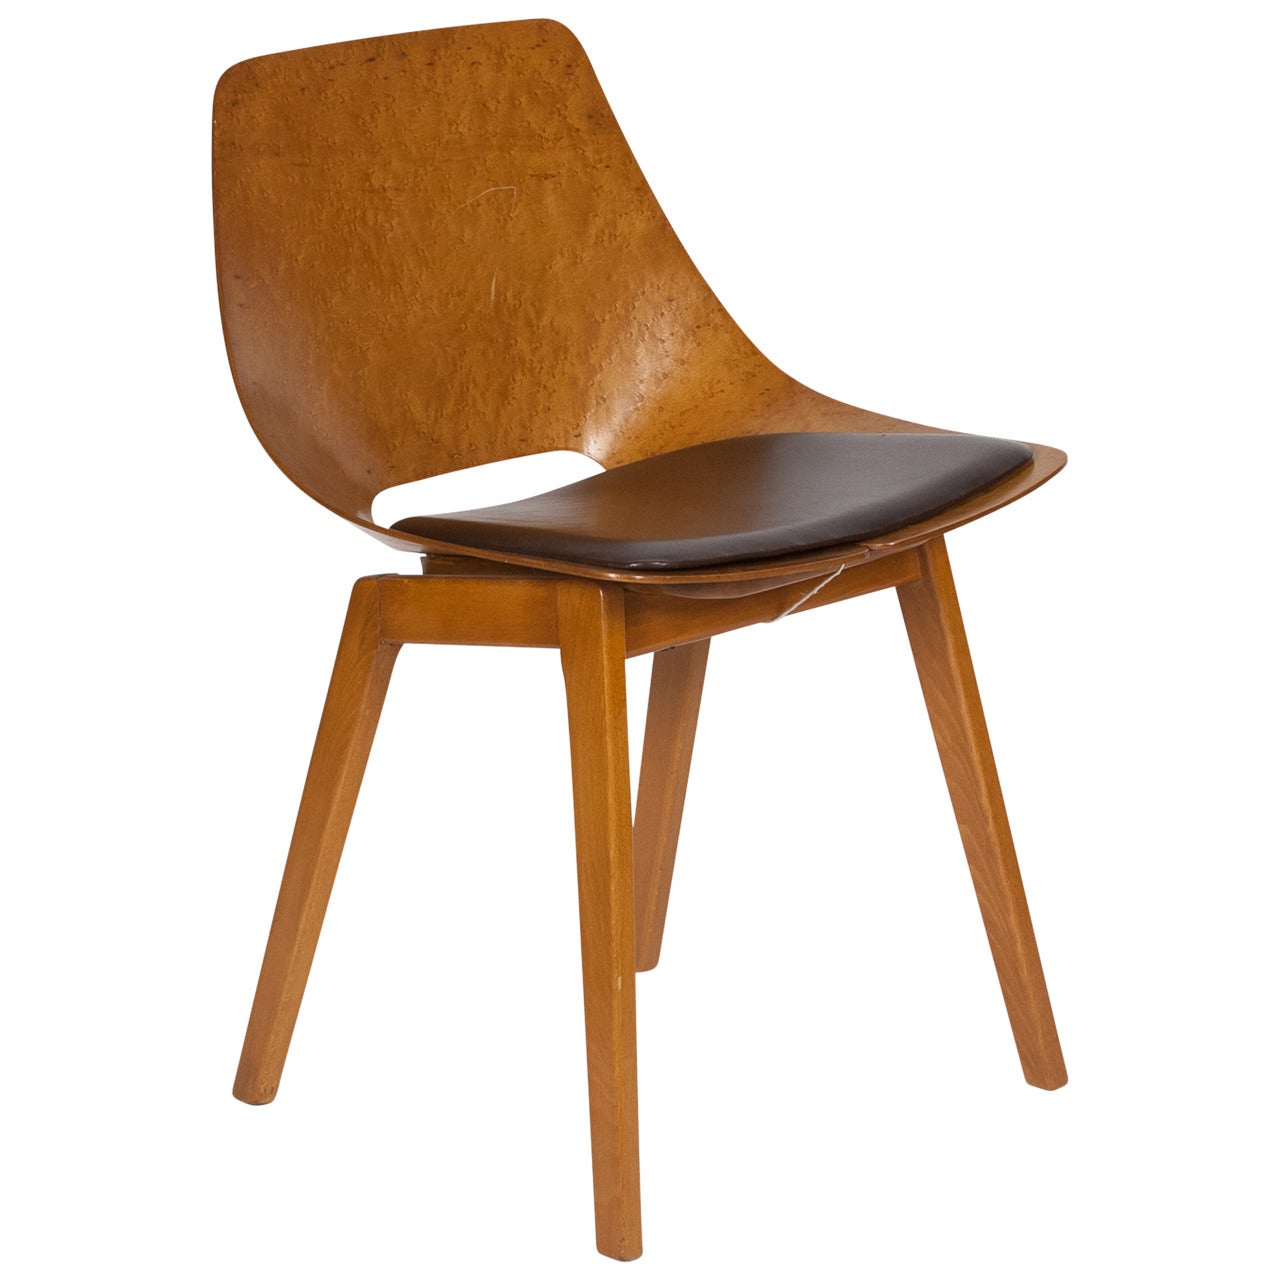 Original Molded Wood Chair by Pierre Guariche, French, 1950